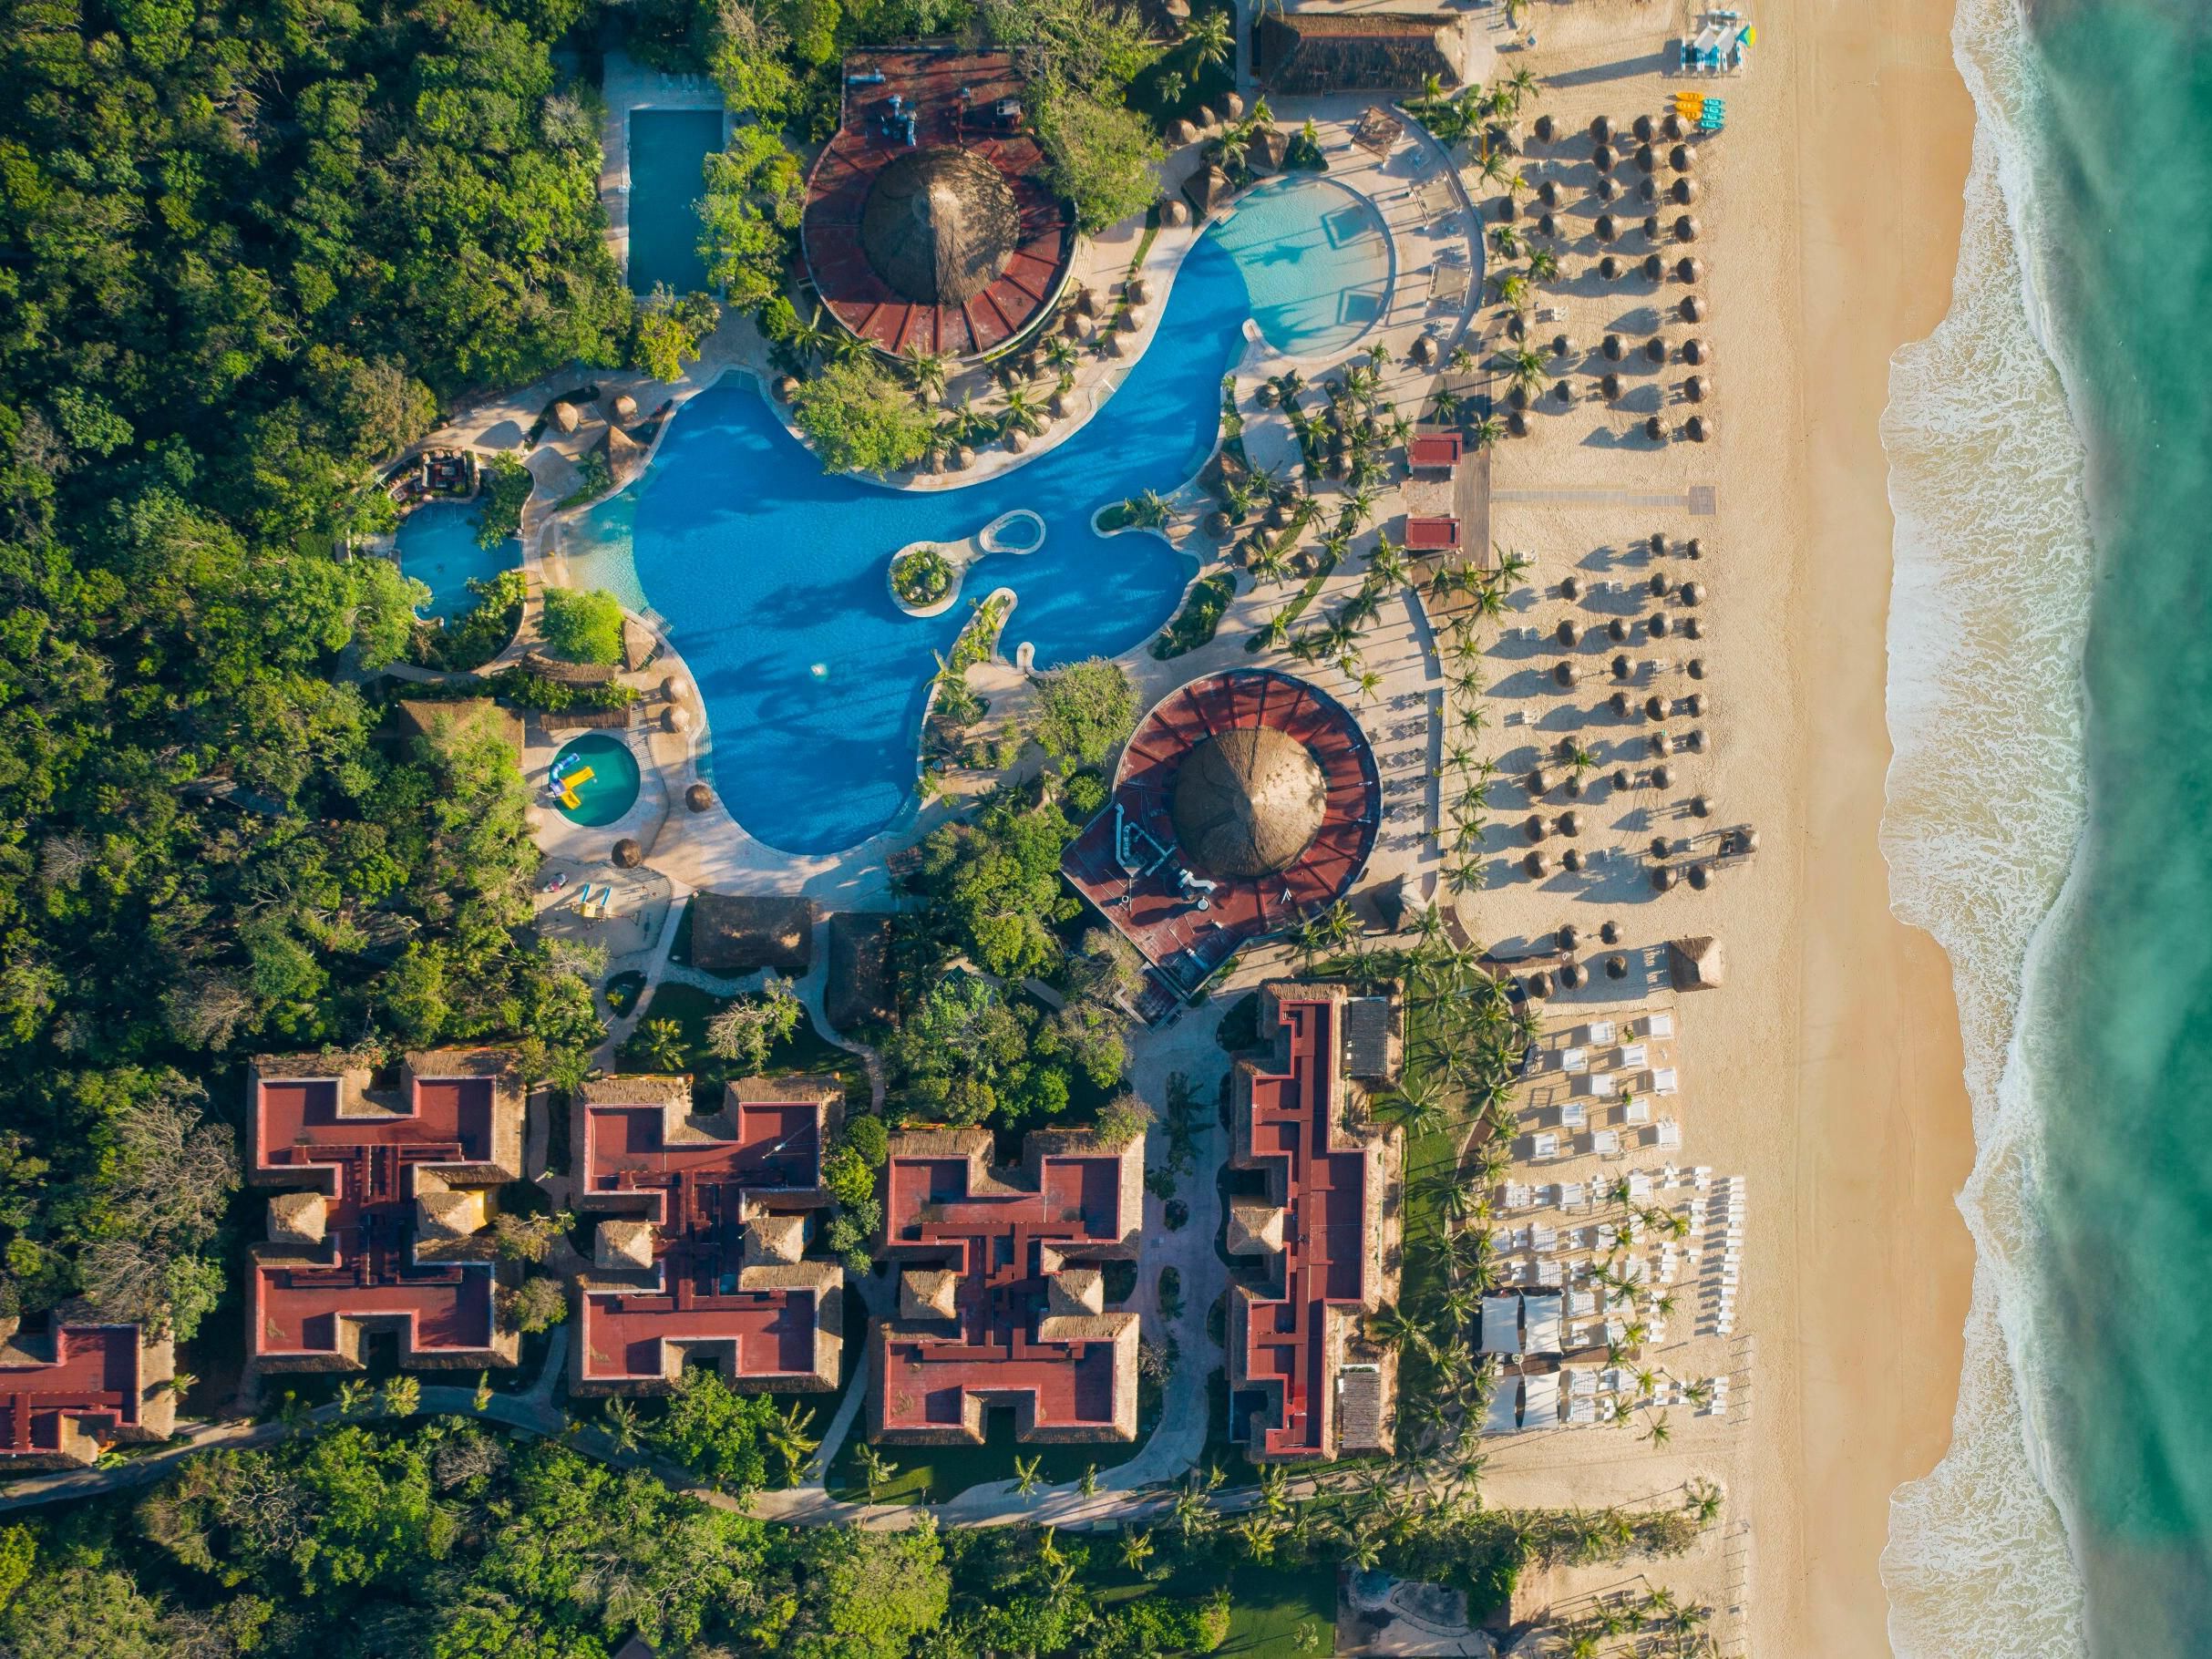 Escape to Iberostar for a sustainable vacation that harmoniously blends luxury with eco-consciousness. Immerse yourself in the natural beauty of our surroundings while enjoying guilt-free indulgence, knowing that we prioritize sustainability at every turn.